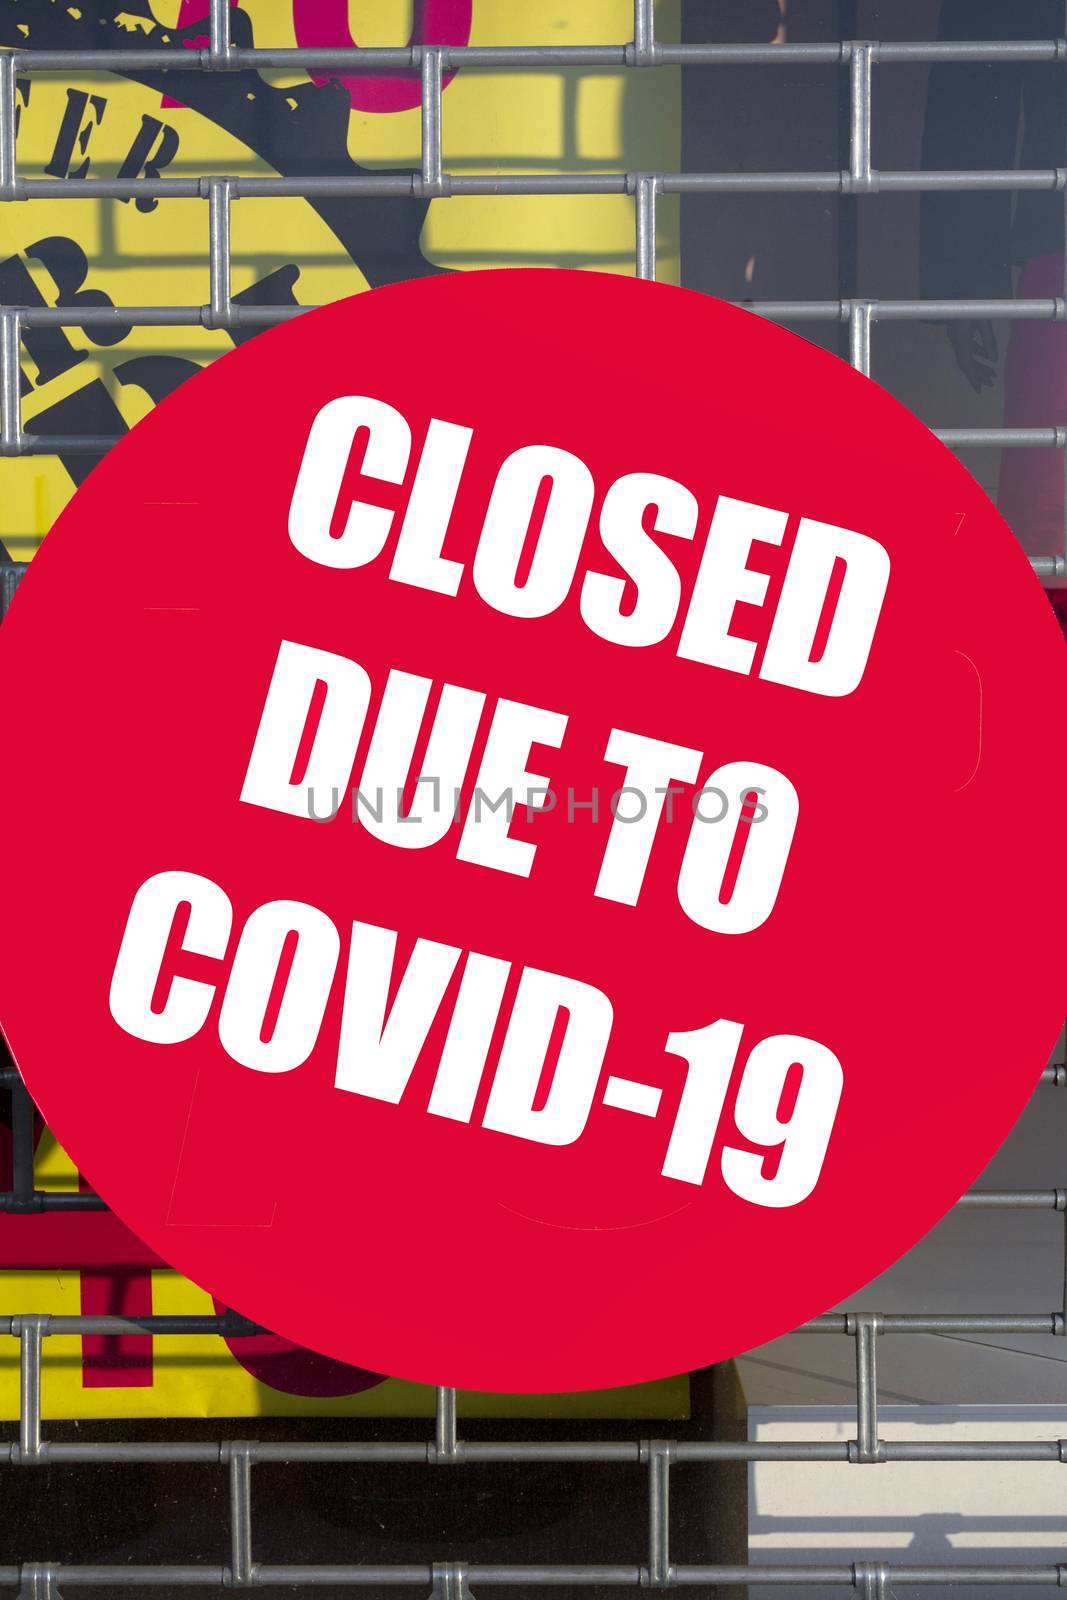 Shop for quarantine for COVID-19. Store closure under COVID-19 global pandemic. Closed wire mesh door front. Small business store closed due to Coronavirus.